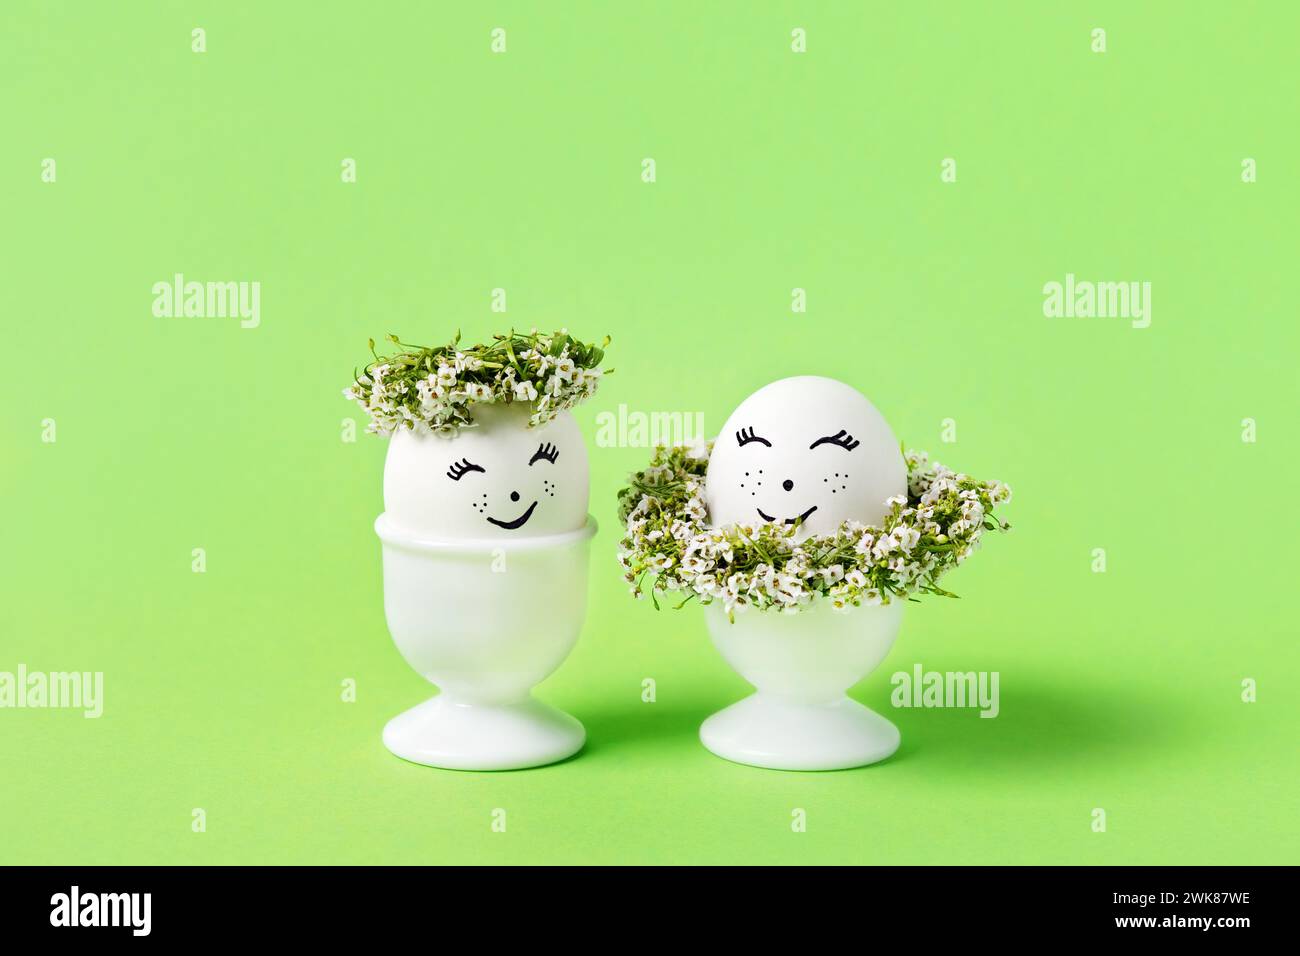 Two blue Easter eggs with funny face with spring flowers in white stands on a green background. Happy Easter concept. Greeting card. Stock Photo